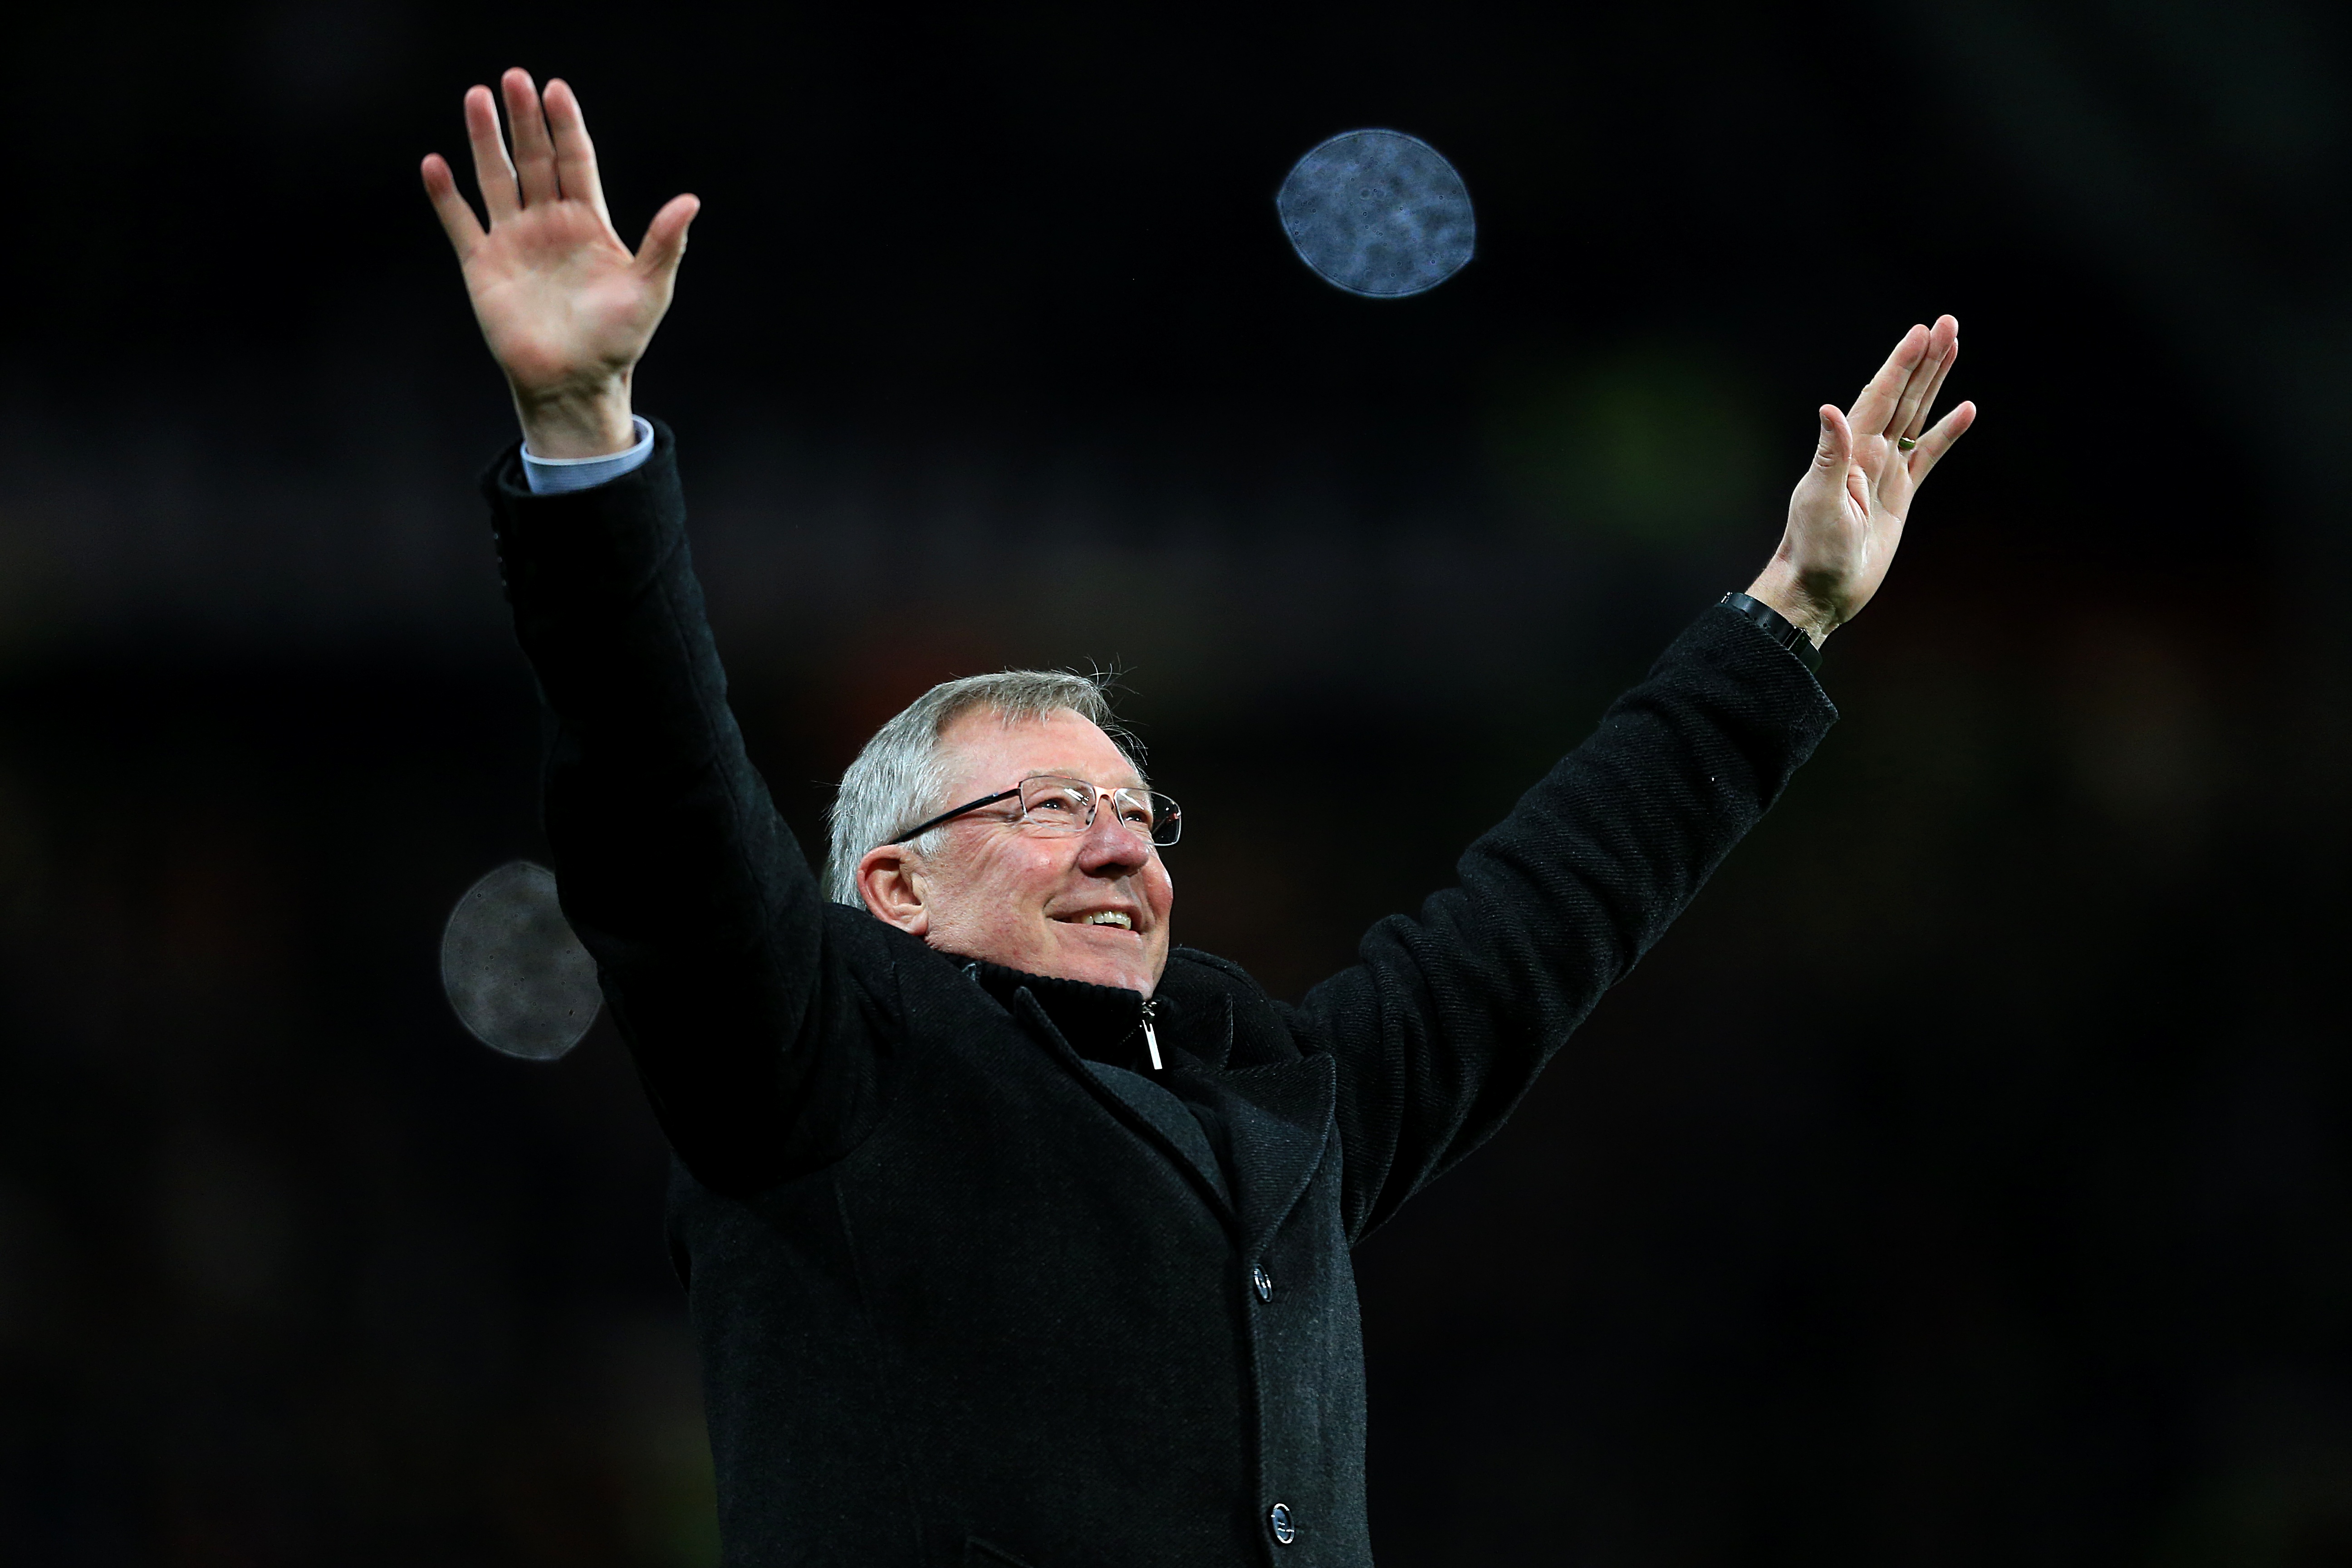 Sir Alex Ferguson celebrates in April 2013 after a Robin Van Persie hat-trick earned a 3-0 win over Aston Villa to secure his 13th and final title as Manchester United manager. Ferguson, then aged 71, retired at the end of the 2012-13 season having won 38 trophies during his 26 years at the club